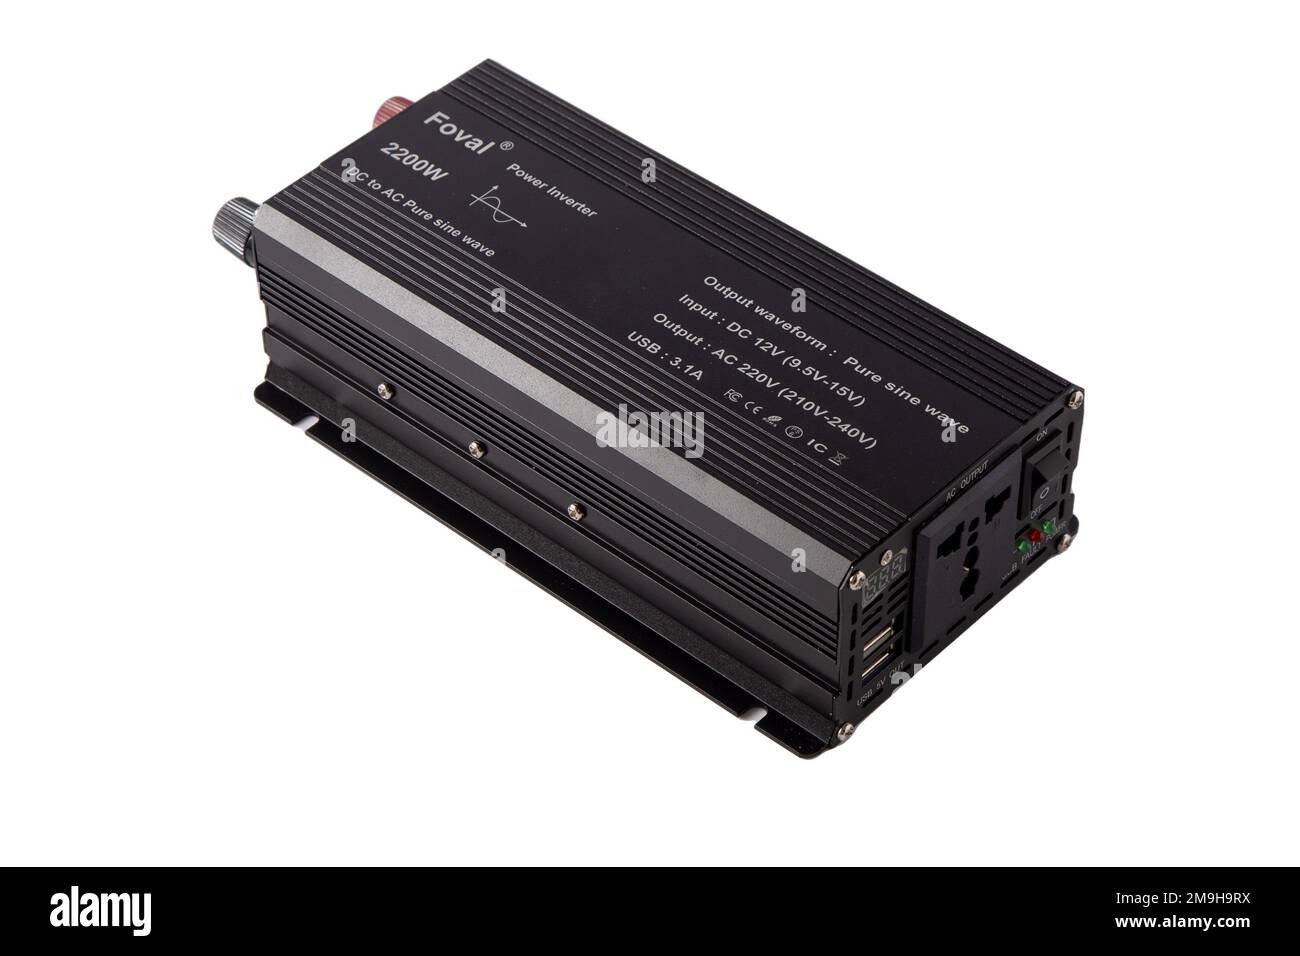 Inverter-voltage converter. Sinusoidal pure sine converter adapter isolated on white background. Power Inverters DC to AC from car battery. Ukraine, Kyiv - January 17, 2023. Stock Photo